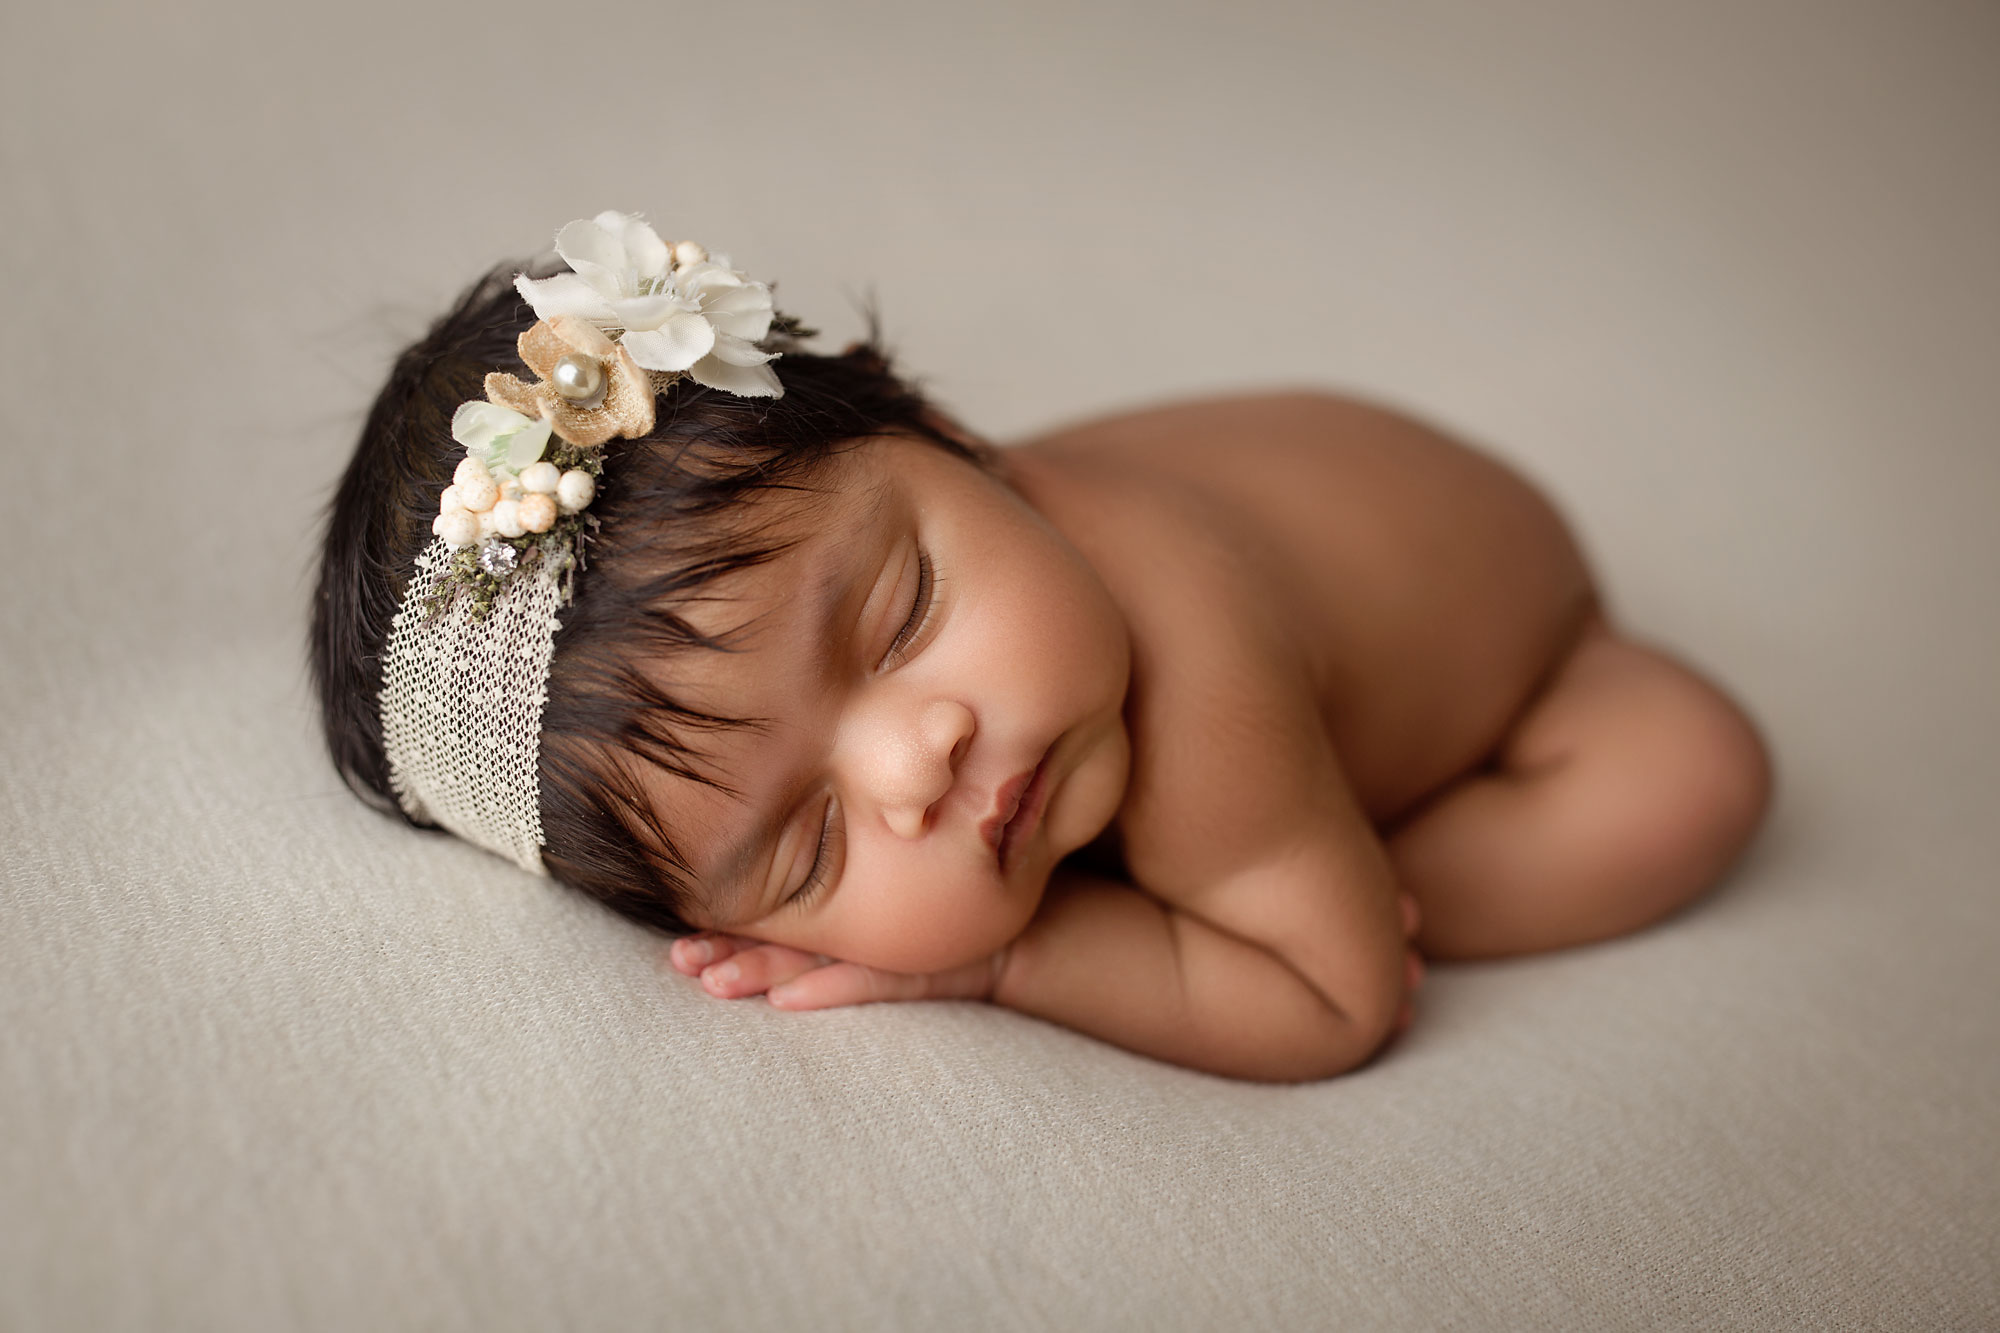 professional newborn photos new jersey, baby girl asleep on white background with pearl and floral headband